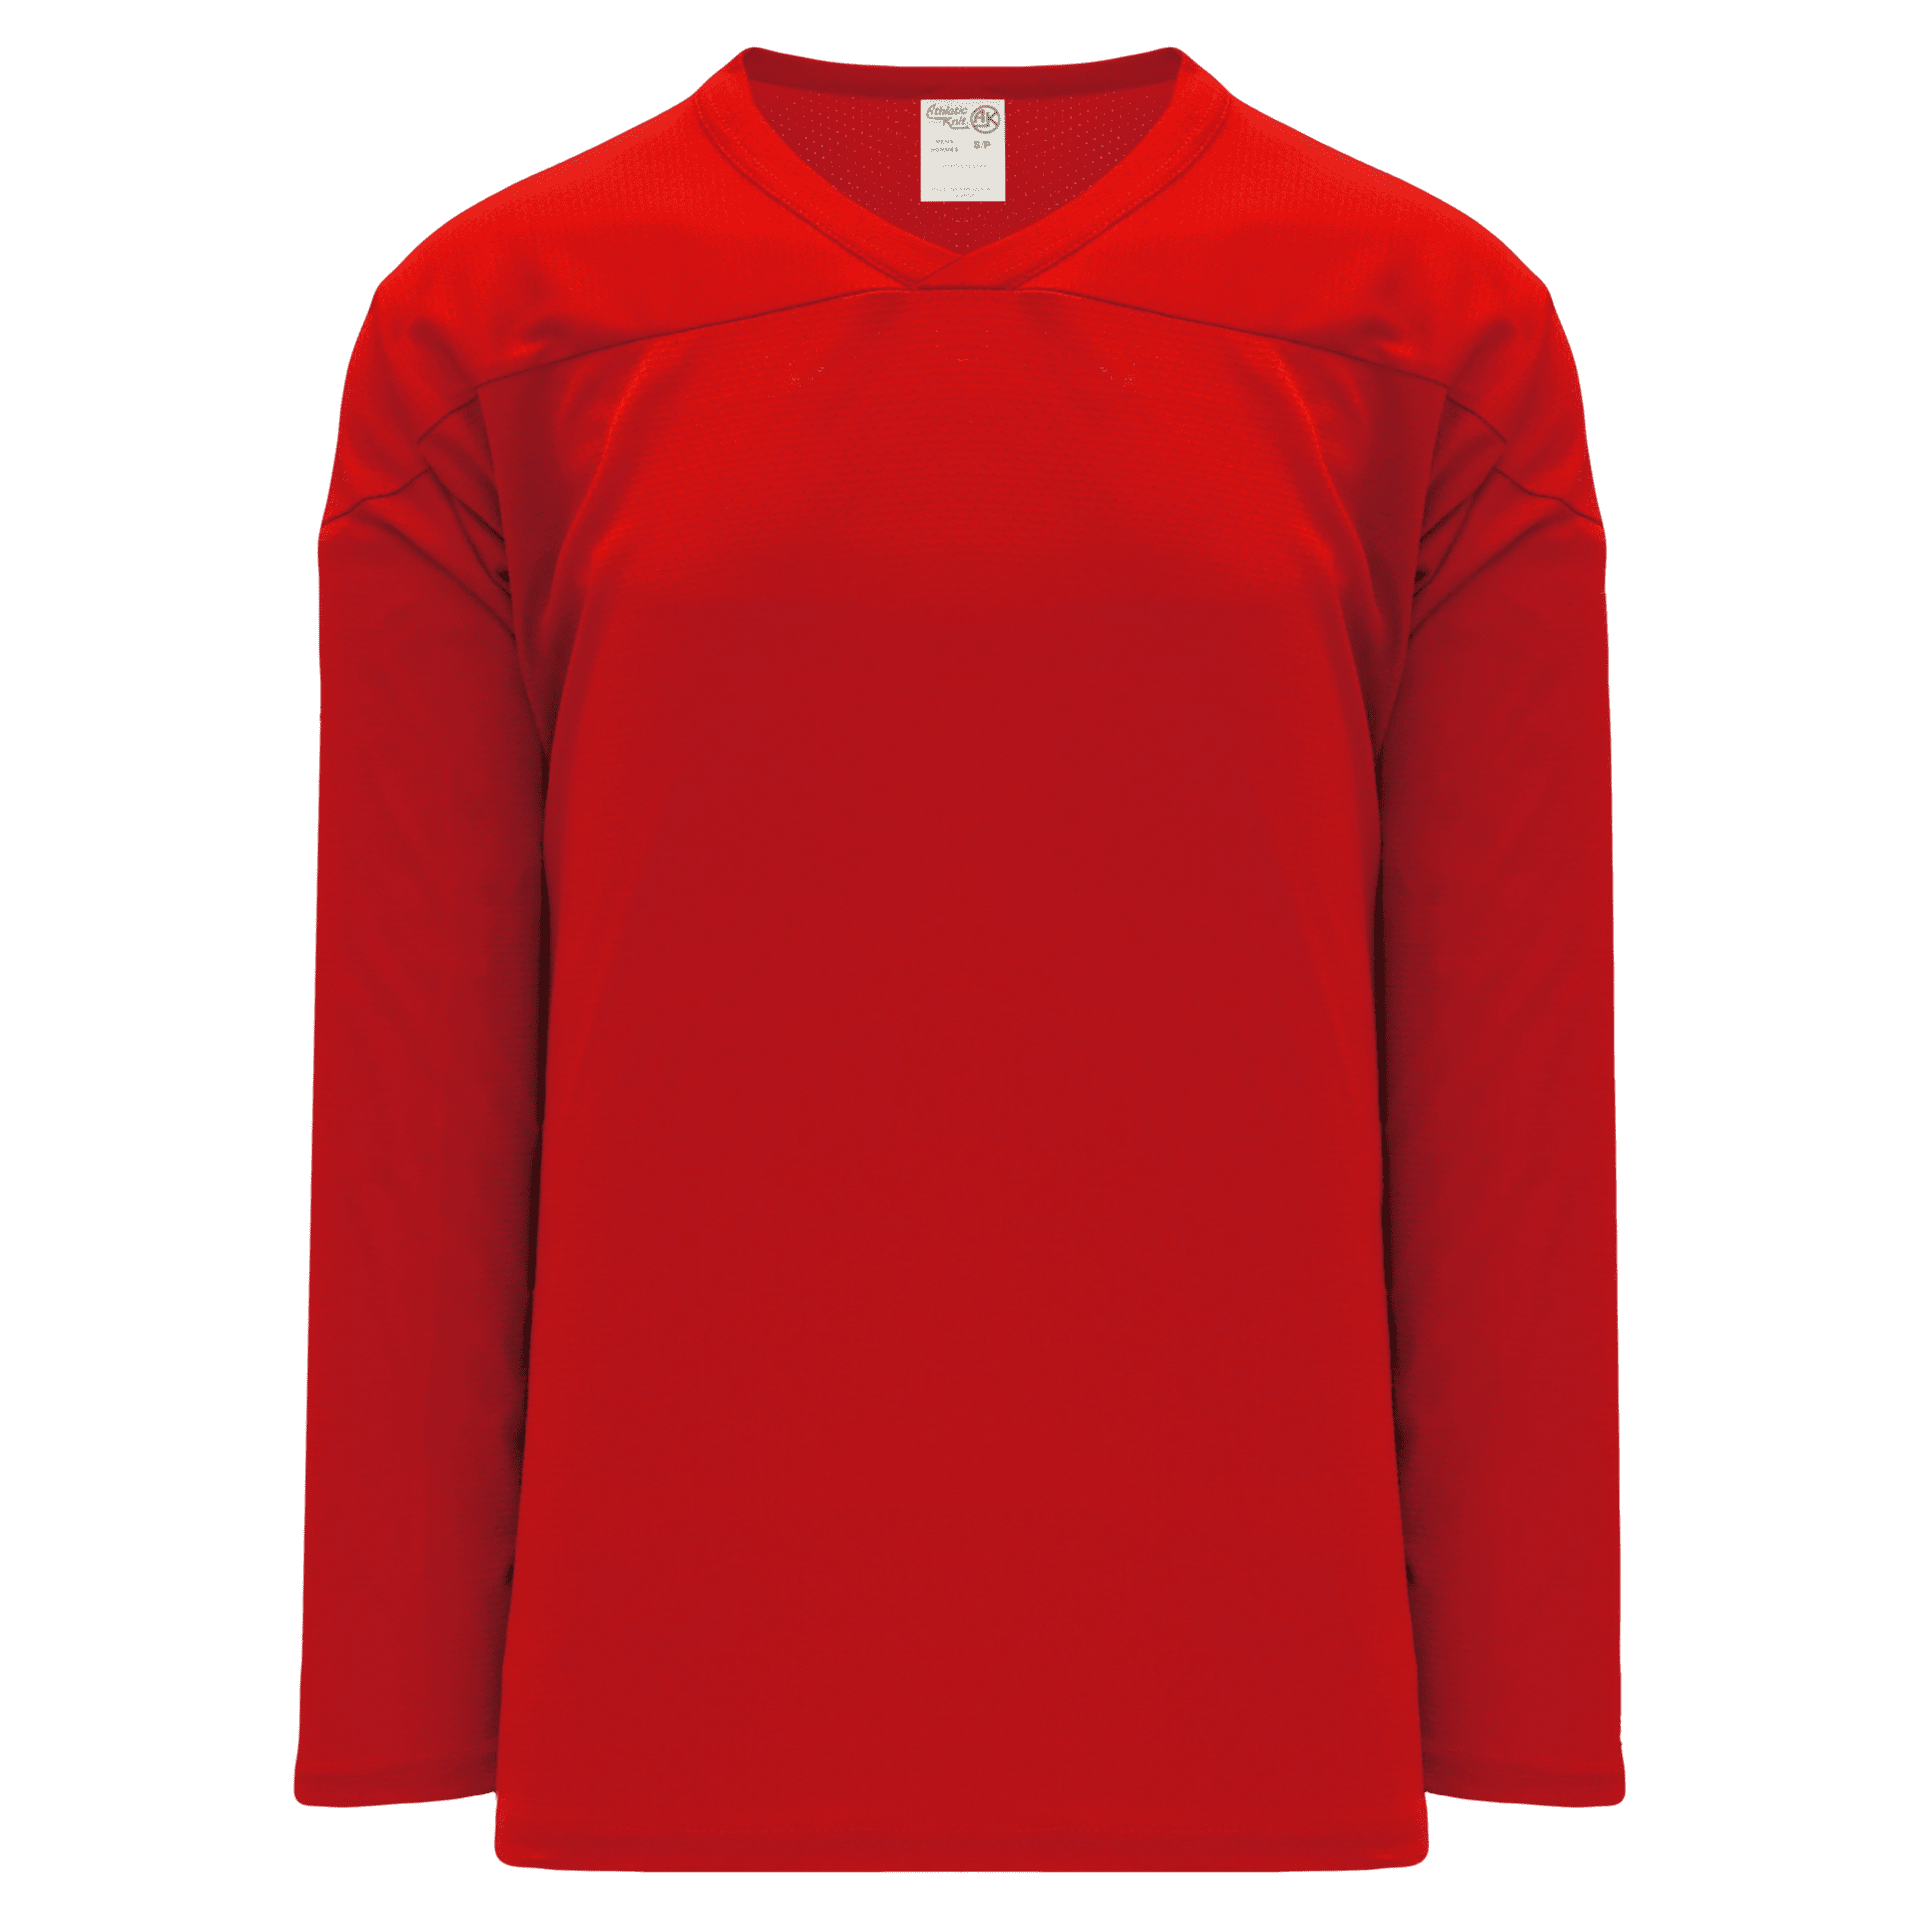 ATHLETIC KNIT PRACTICE HOCKEY JERSEY #H6000 Red